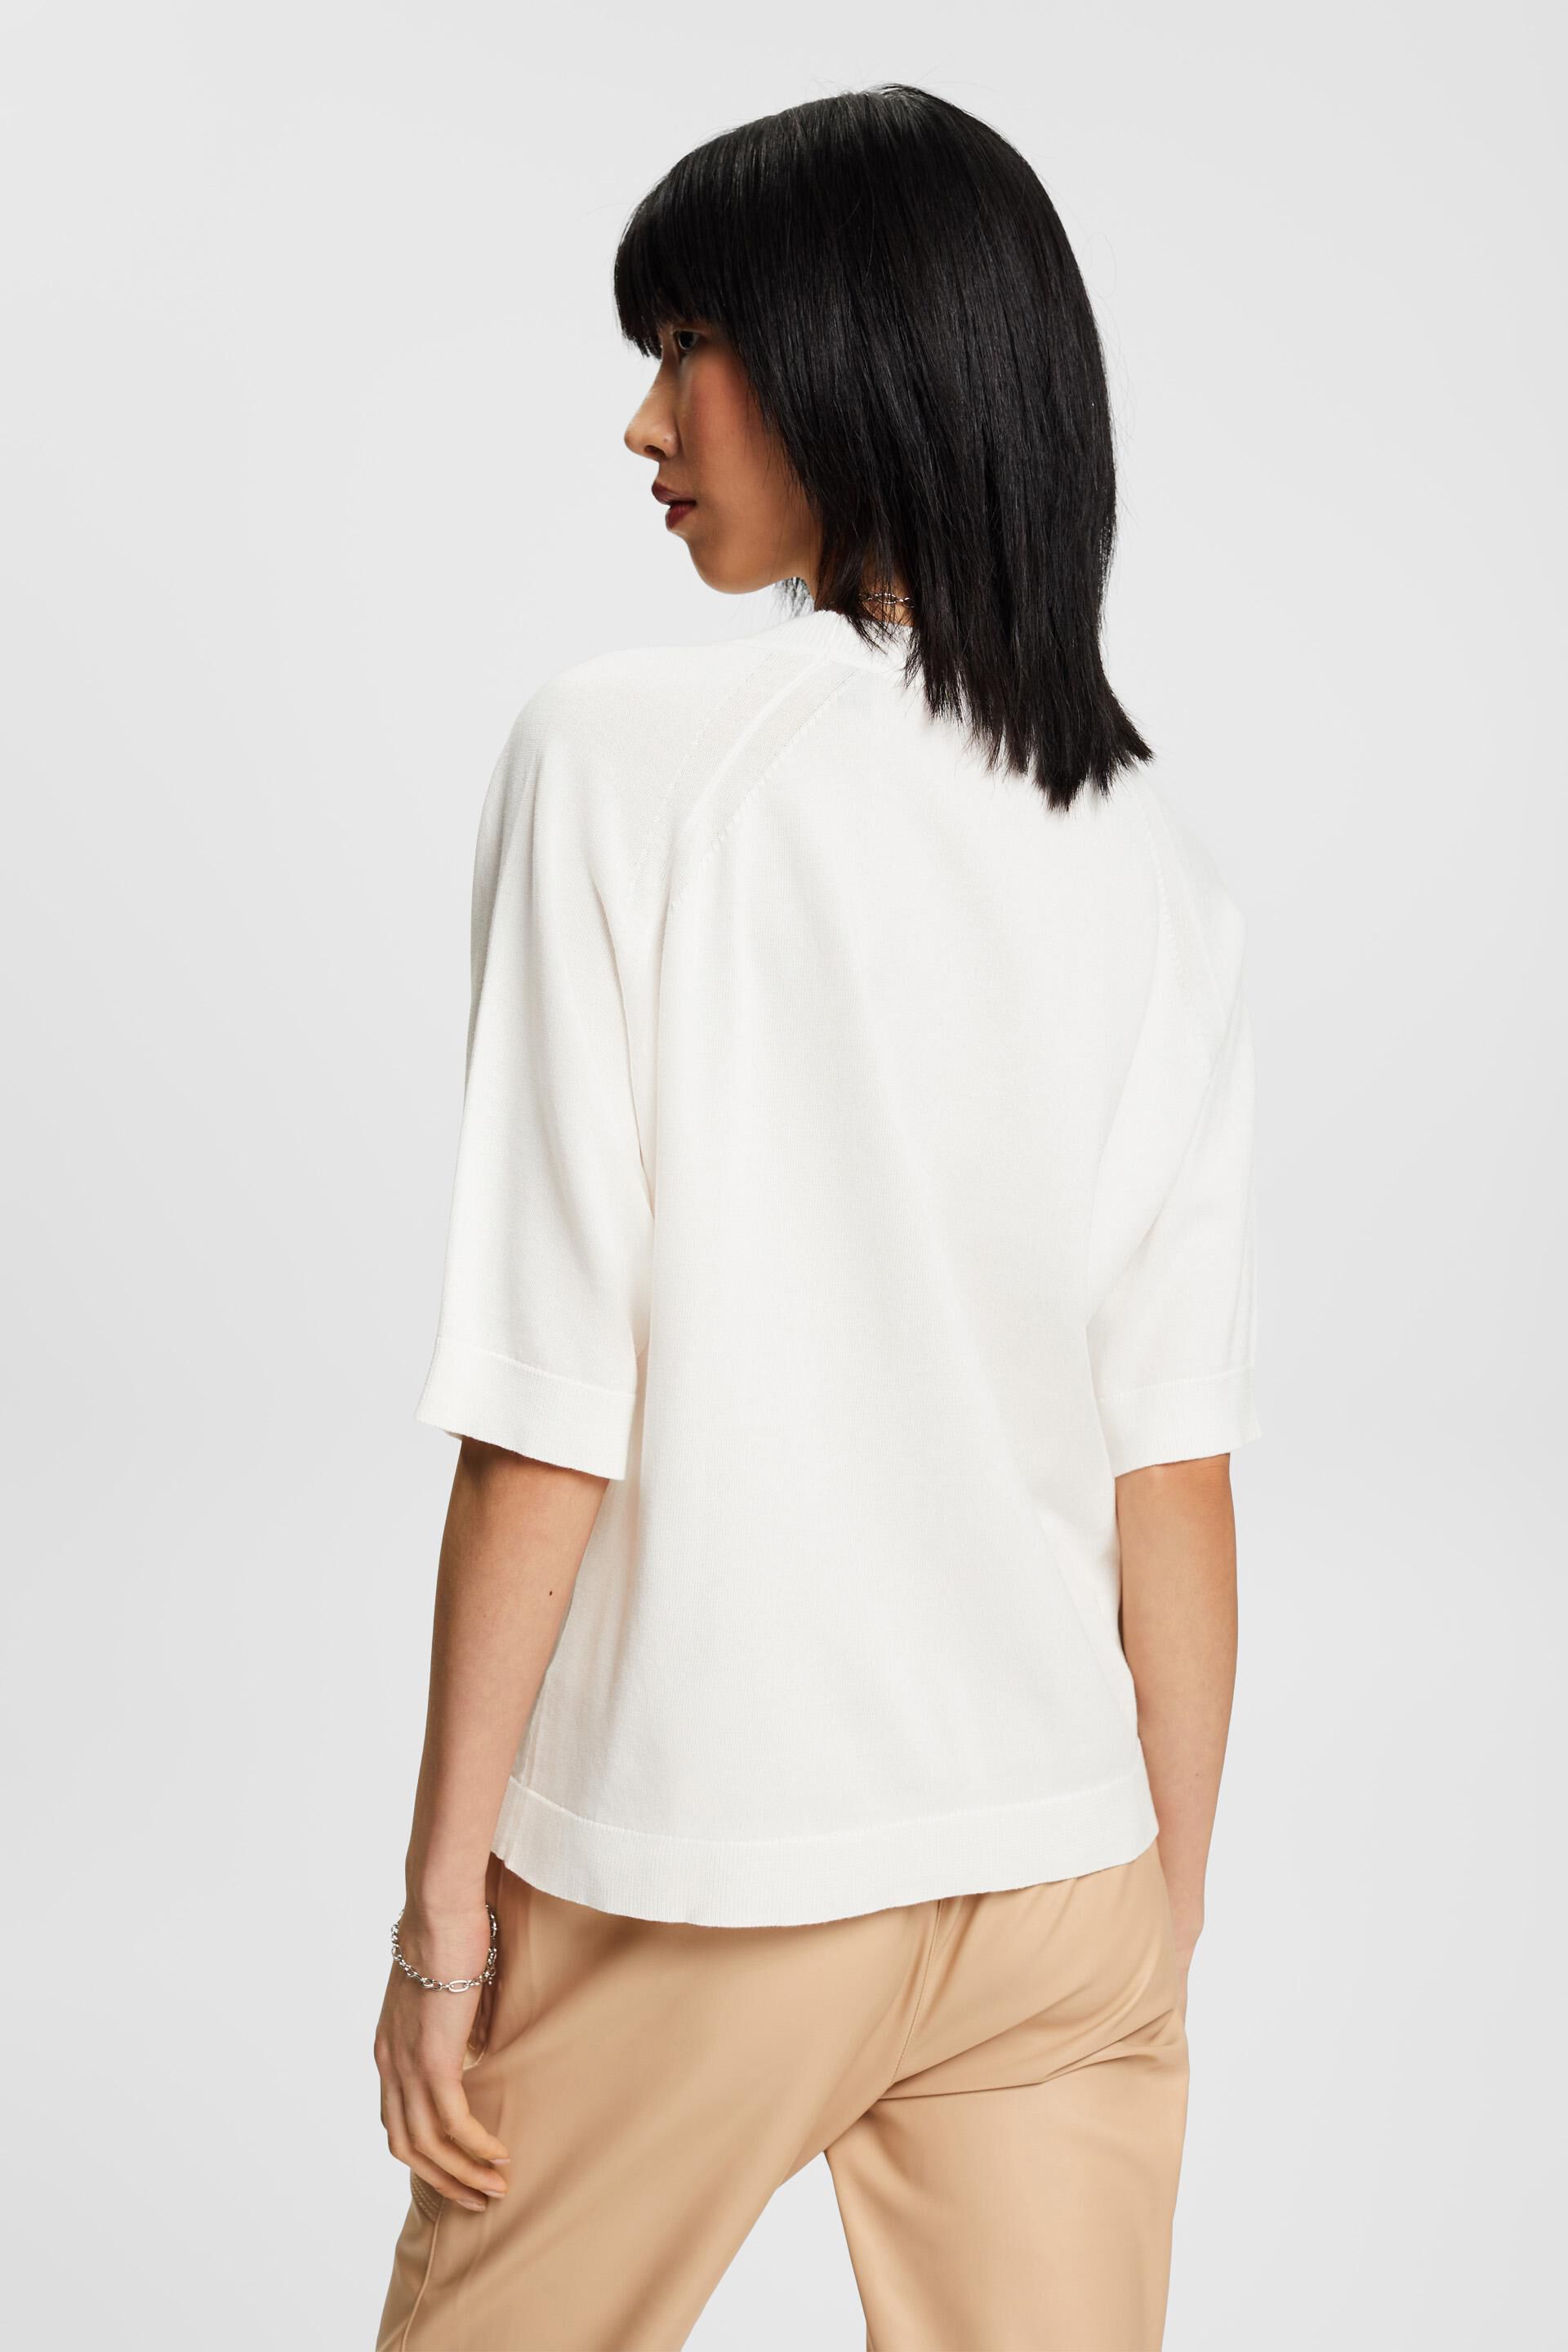 ESPRIT - Short sleeve knit sweater at our online shop